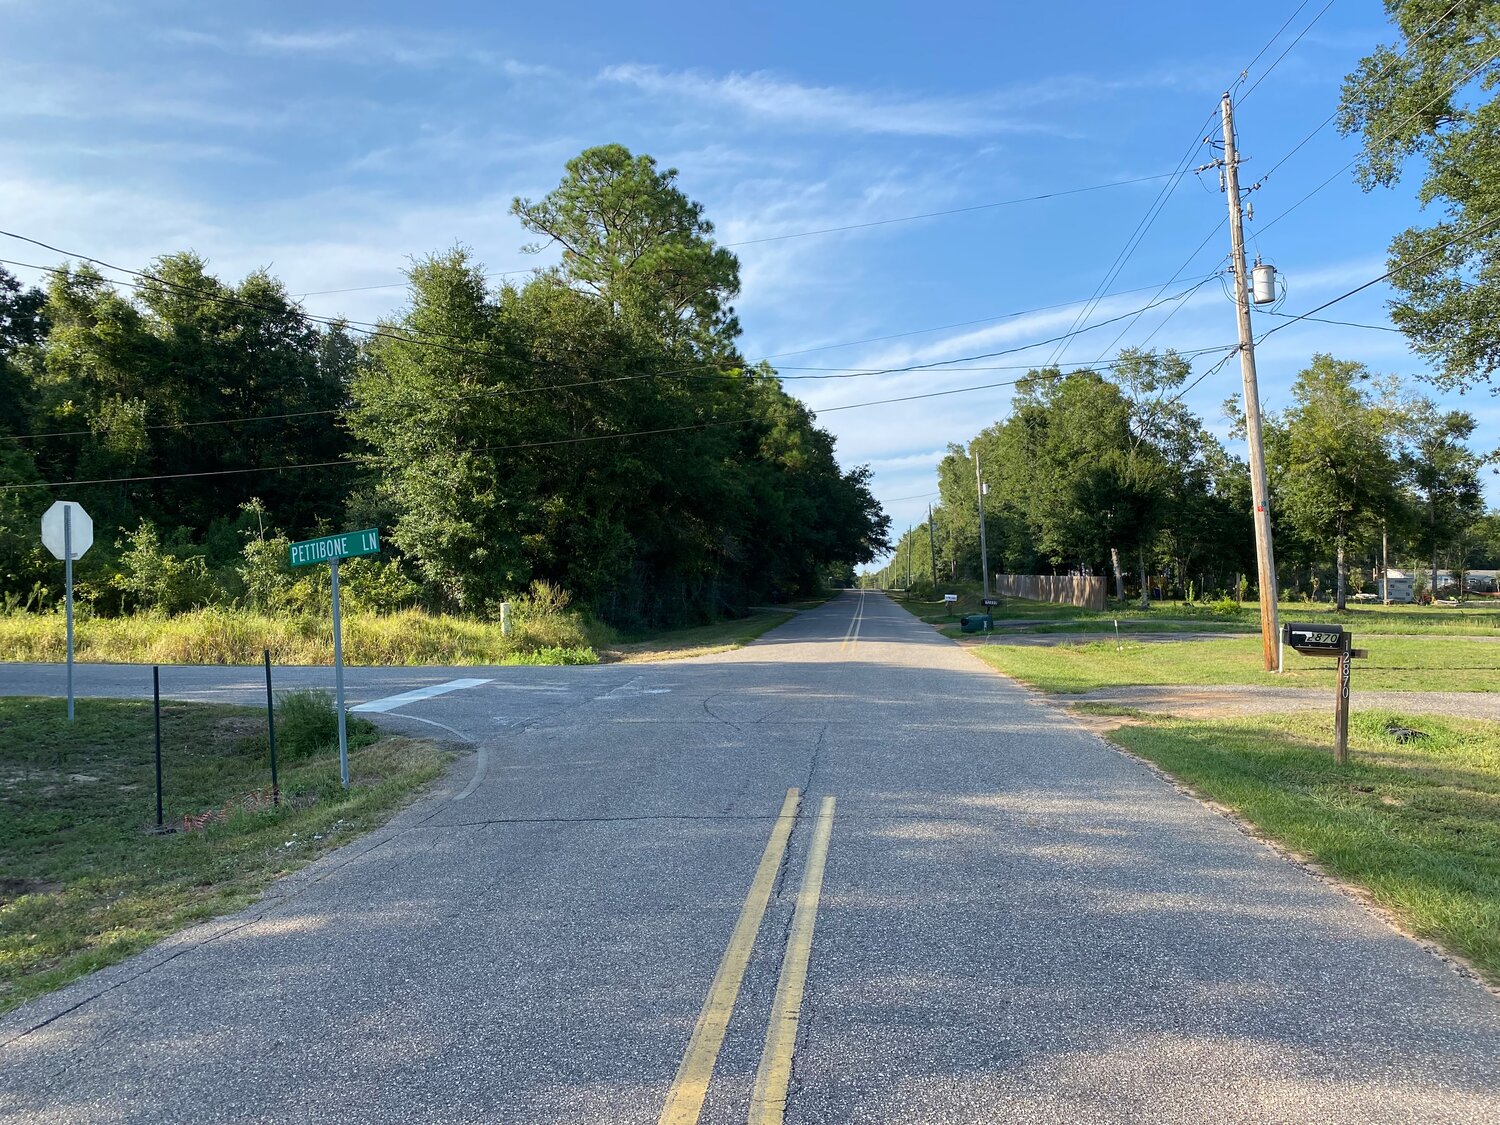 New street lights are planned on streets in the Mills Community following the area’s annexation into Foley. Residents voted Aug. 22 to approve an annexation referendum.